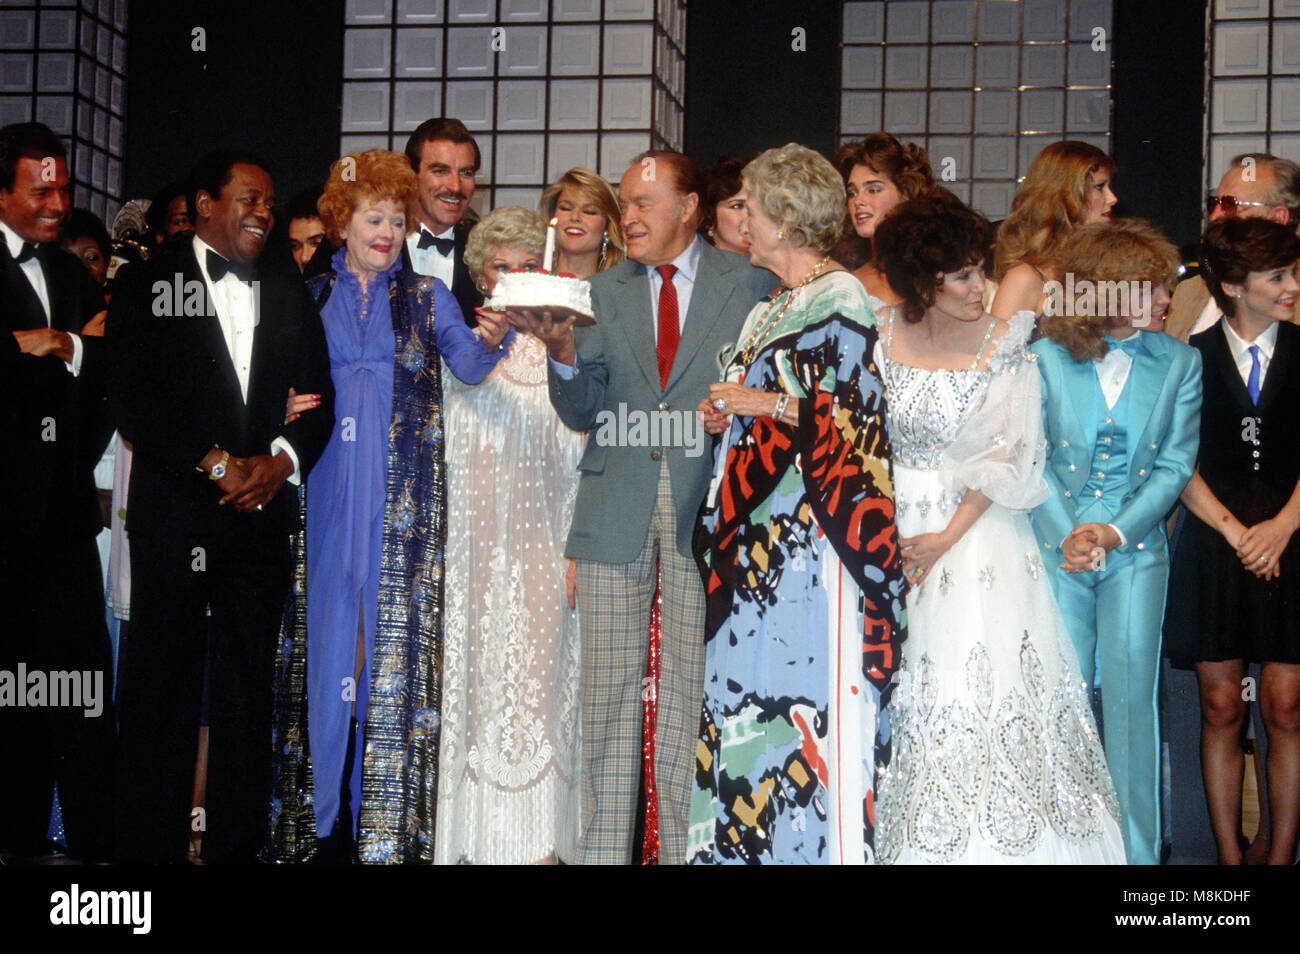 Washington DC., USA, May 20, 1983 Hollywood star Bob Hope is presented with a cake by Lucille Ball on the occasion for his 80th birthday. This was a special being filmed by NBC at the Kennedy Center for the Performing Arts in DC. Guests included President Ronald Reagan,Nancy Reagan,  Dolores Hope, Governor Ray Schafer, Brooke Shields, George Burns, Kathryn Crosby, Tom Selleck, Lynda Carter, Julio Iglesias, Christie Brinkley, Howard Cosell, Babara Mandrell, Loretta Lynn, Dudley Moore, Phyllis Diller, George C. Scott, Cheryl Tiegs, Tommy Tune, Tiggy, Flip Wilson, Sheena Easton, Ann Jillian, Robe Stock Photo